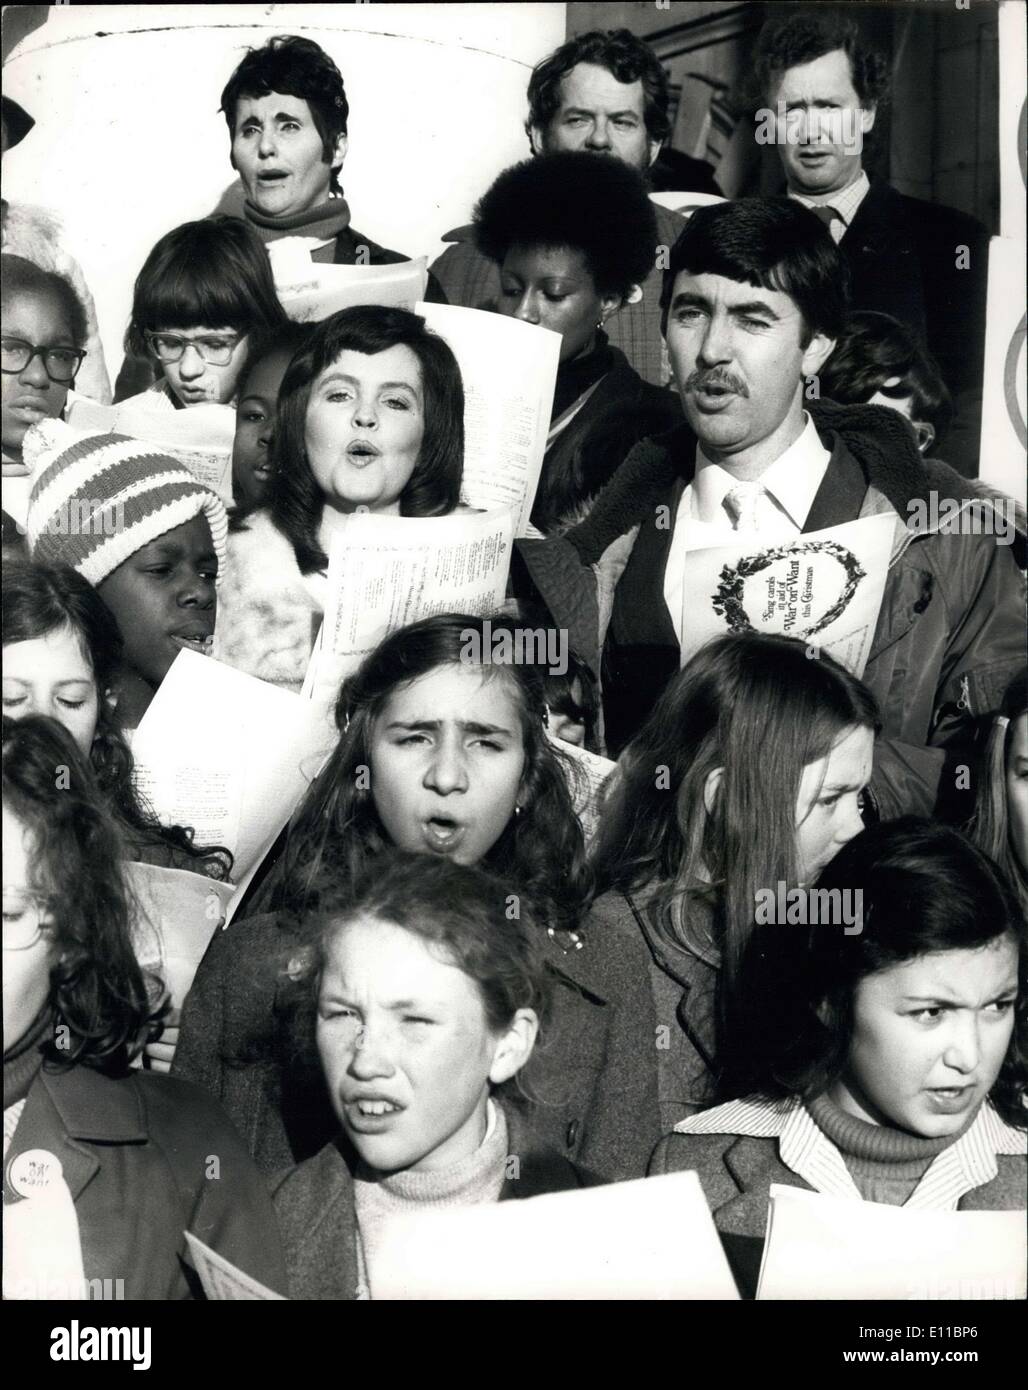 Dec. 09, 1976 - Actor John Alderton Helps To Launch Carol Marathon Actor John Alderton and his actress wife, Pauline Collins, today joined the ''War On Want'' staff and girls from the Mount Carmel School in Holloway, for the launch of War On Want's 1976 Carol Marathon. Each year a letter signed by Harry Secombe is sent to schools around the country asking children to go carol singing locally for the War on Want at Christmas. The Marathon was launched on the steps of St. Martin-in-th-Field, Trafalgar Square Stock Photo